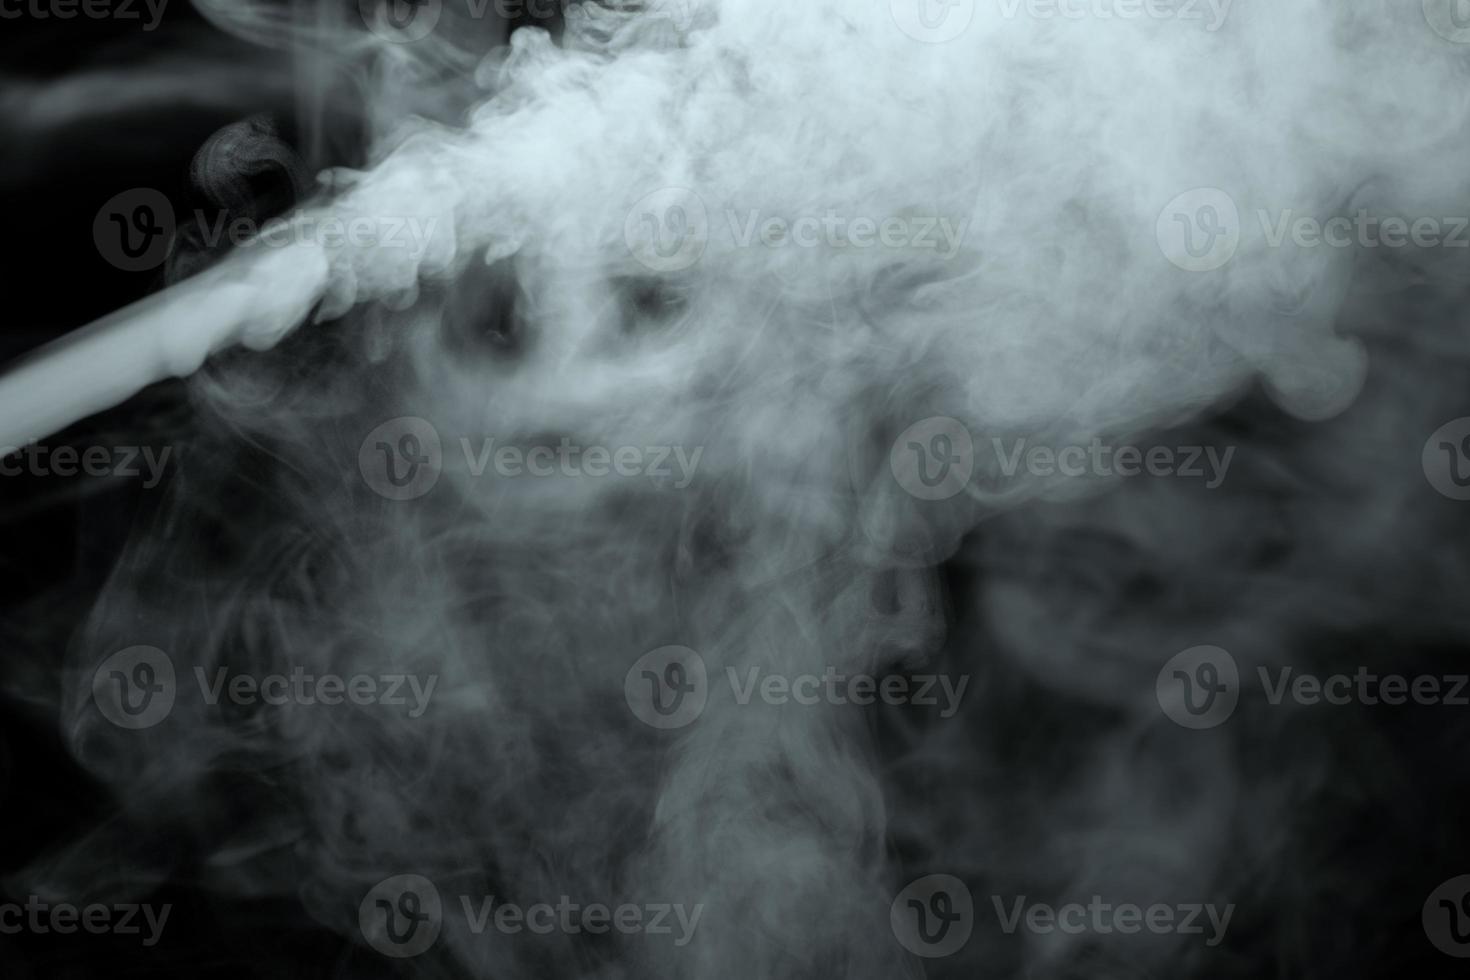 Abstract powder or smoke isolated on black background,Out of focus photo